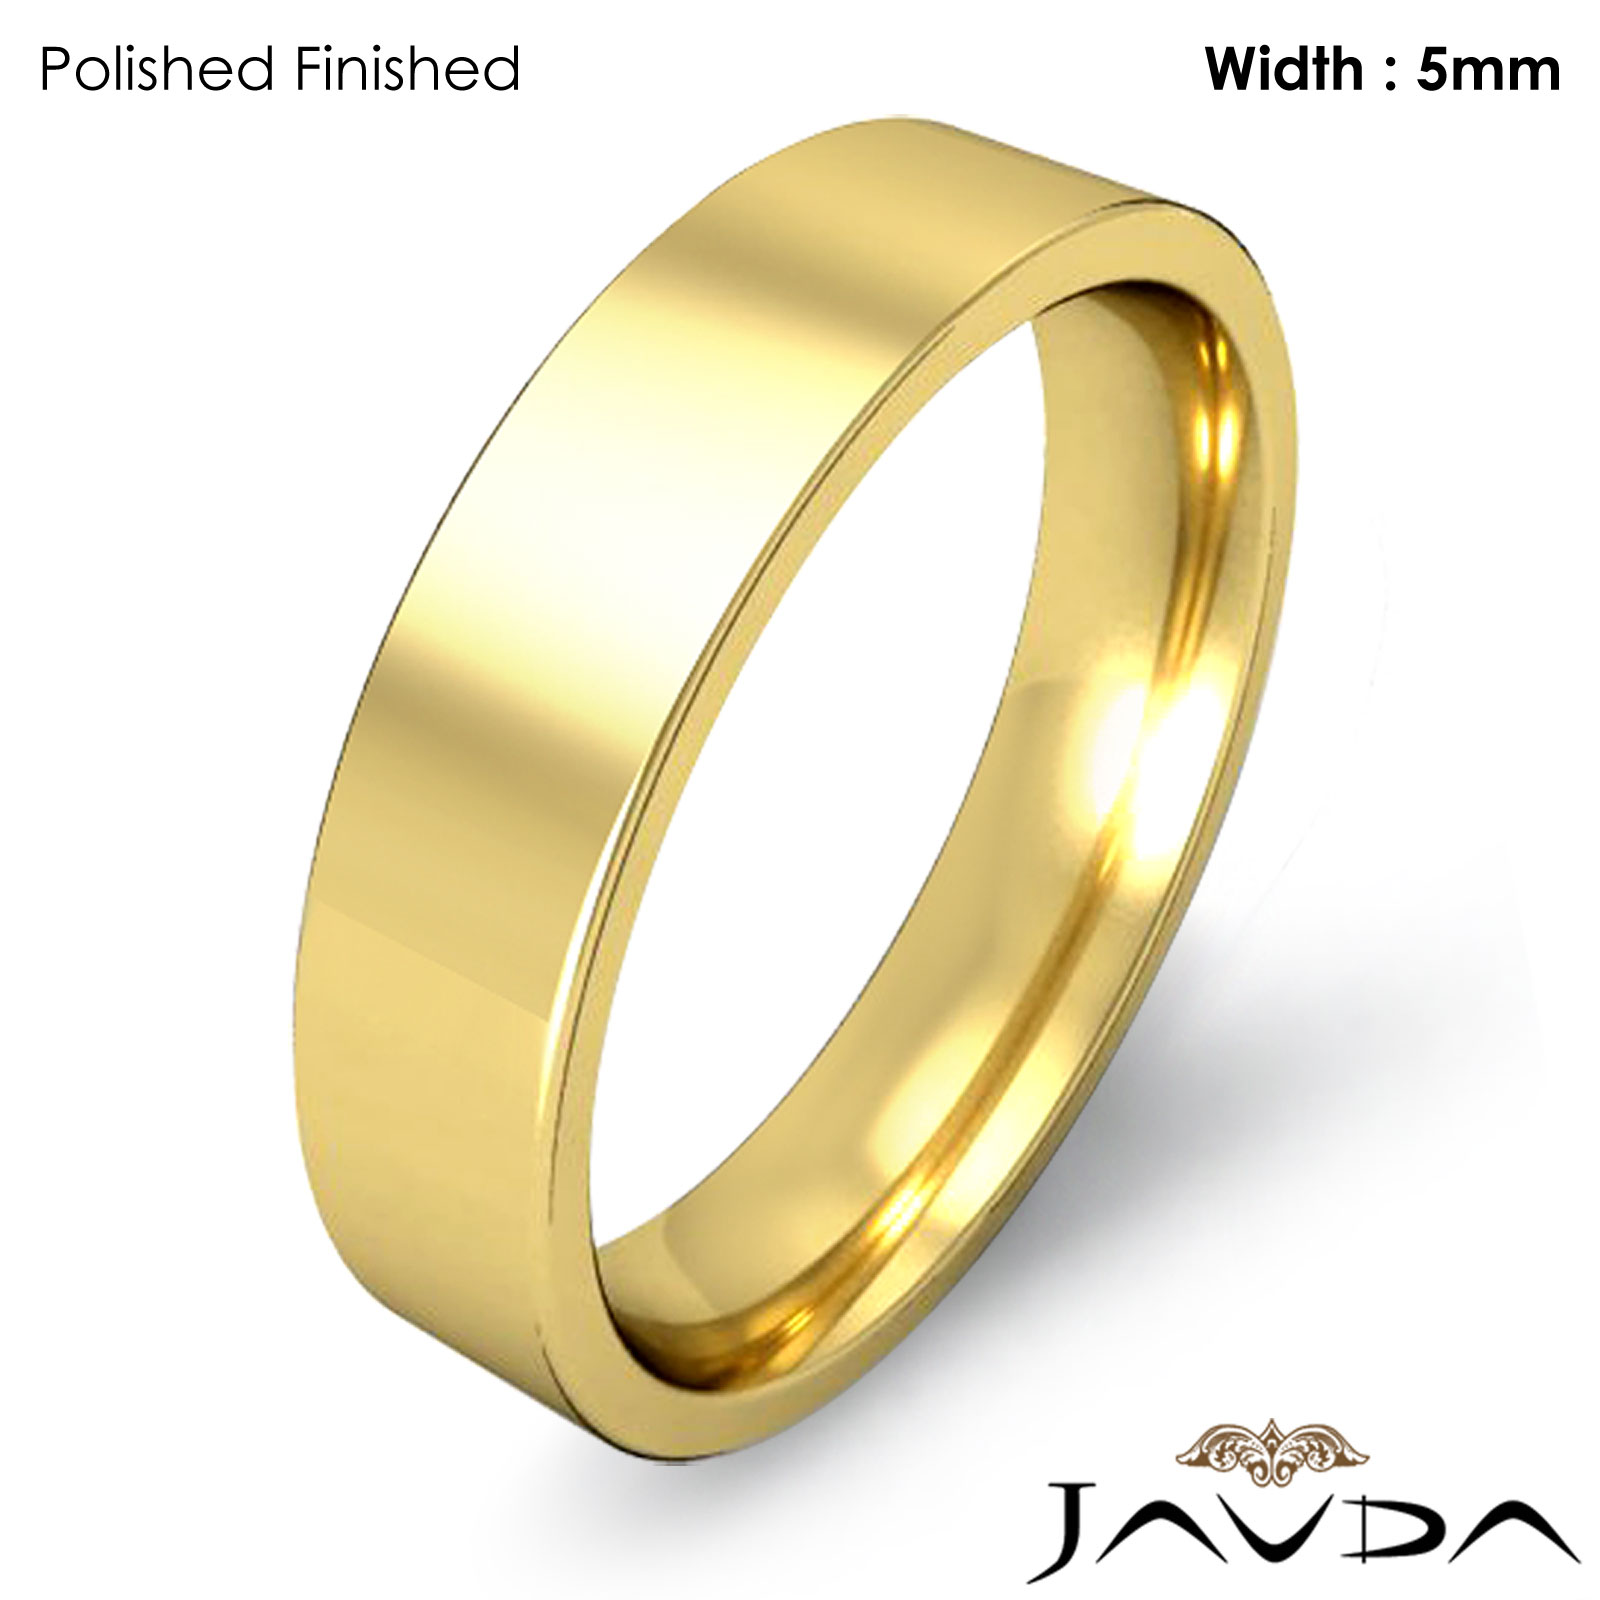 ... Gold Comfort Fit Men Wedding Band Pipe Cut Ring 7gm Size 11-11.75